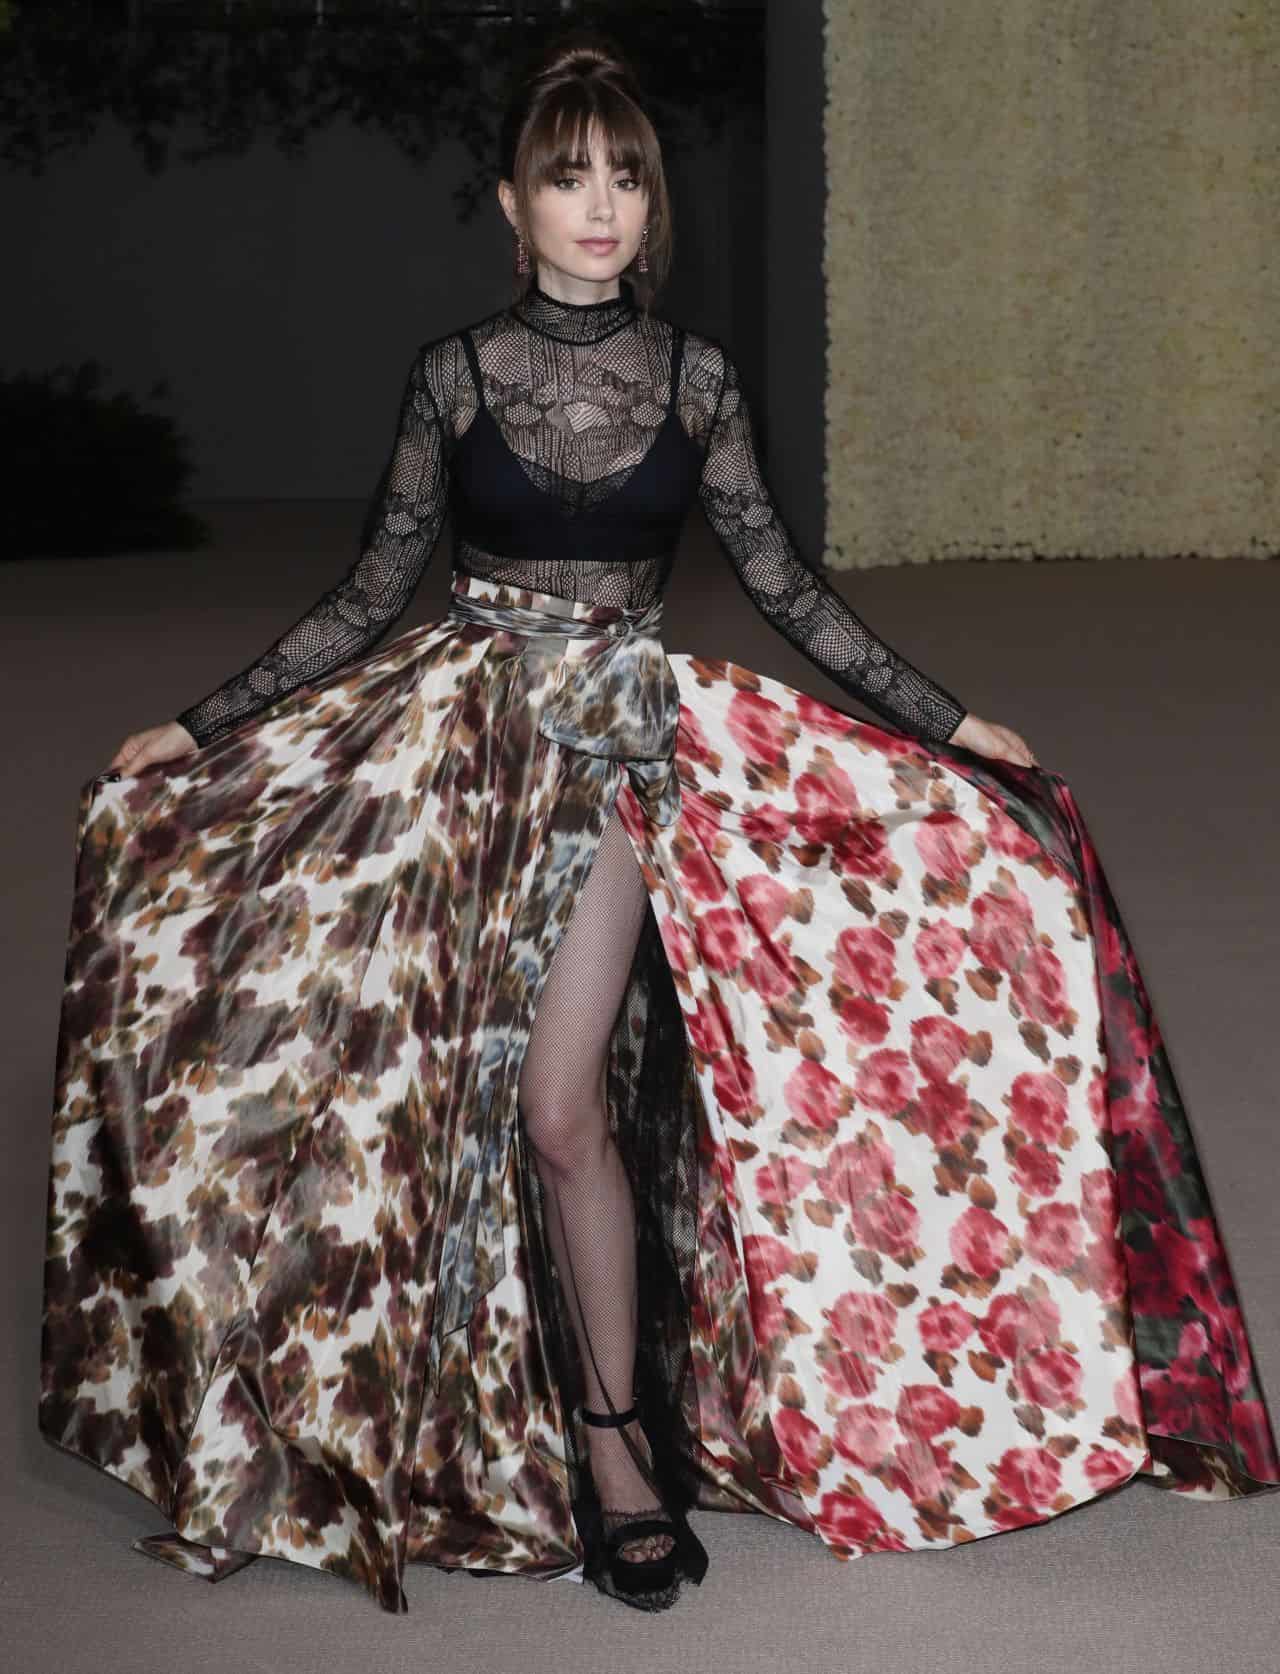 Lily Collins Put on a Leggy Display in Dior Skirt at Academy Museum Gala